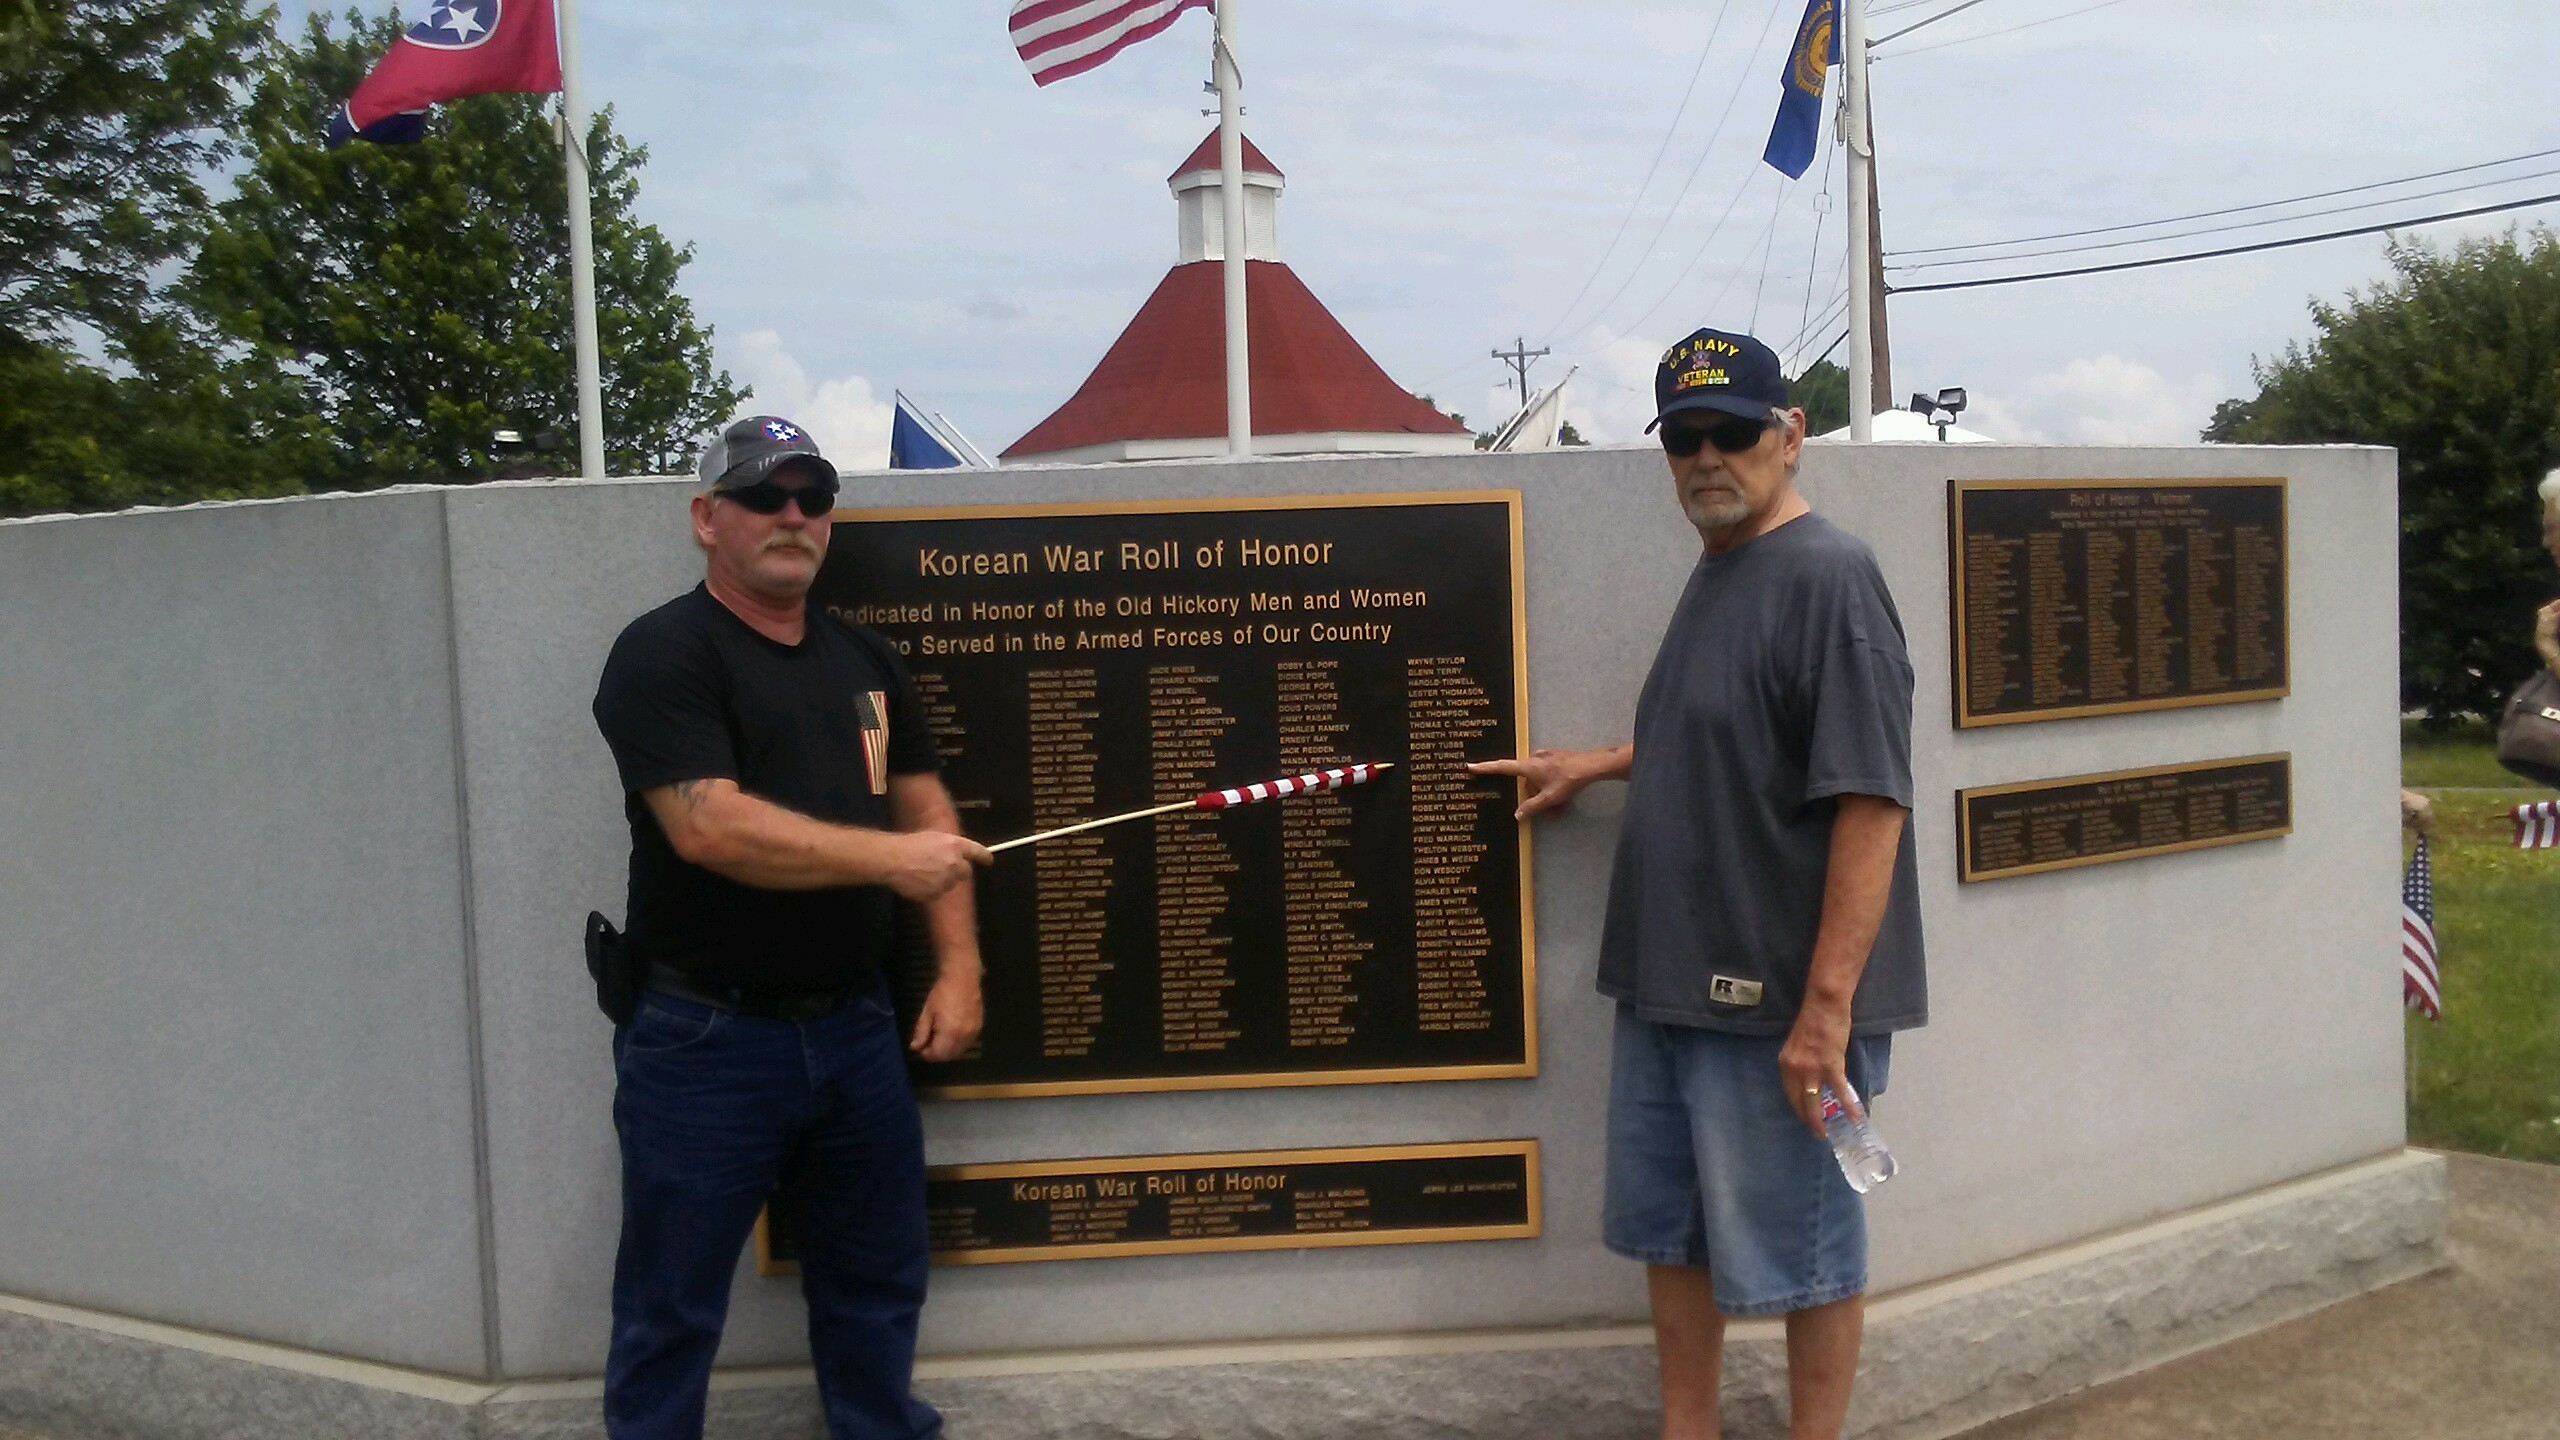 Claude Turner w/ cousin Larry Dickens. Pointing to his daddy's name on the veterans wall in the Village in Old Hickory,TN